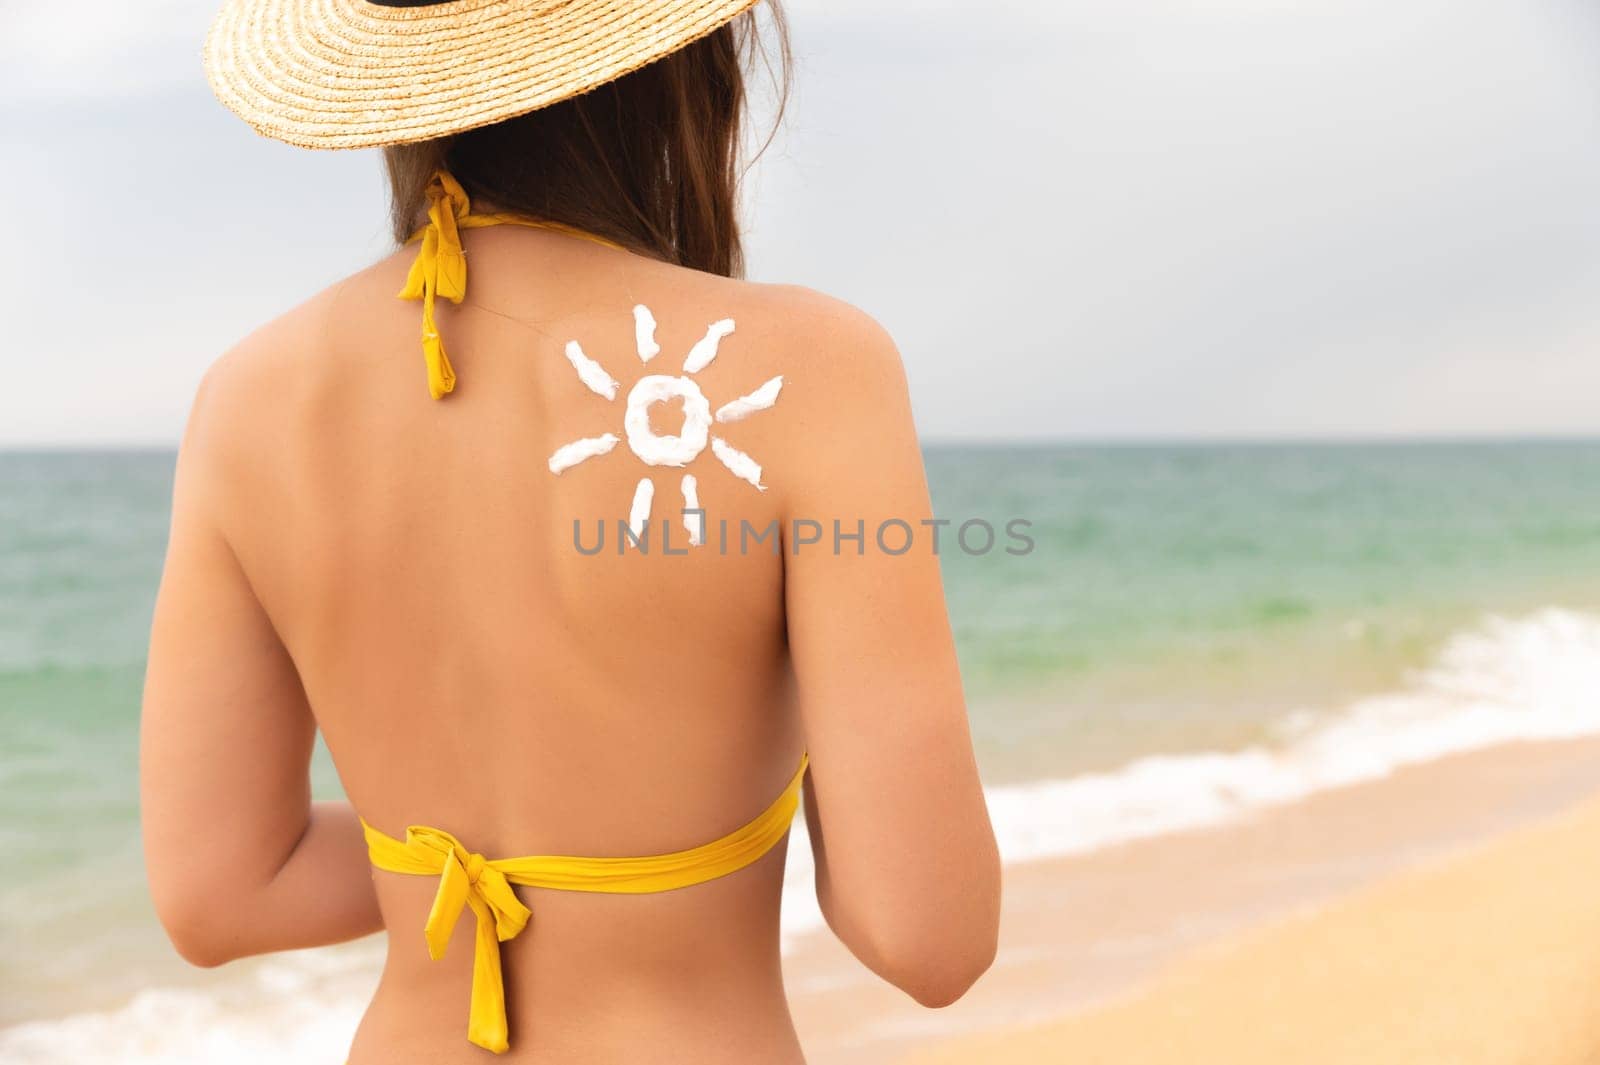 Sun protection. A beautiful, unrecognizable girl wears sunscreen on her tanned shoulder in the shape of a sun. Skin care, young woman in a straw hat and swimsuit stands with her back to the camera at sea.